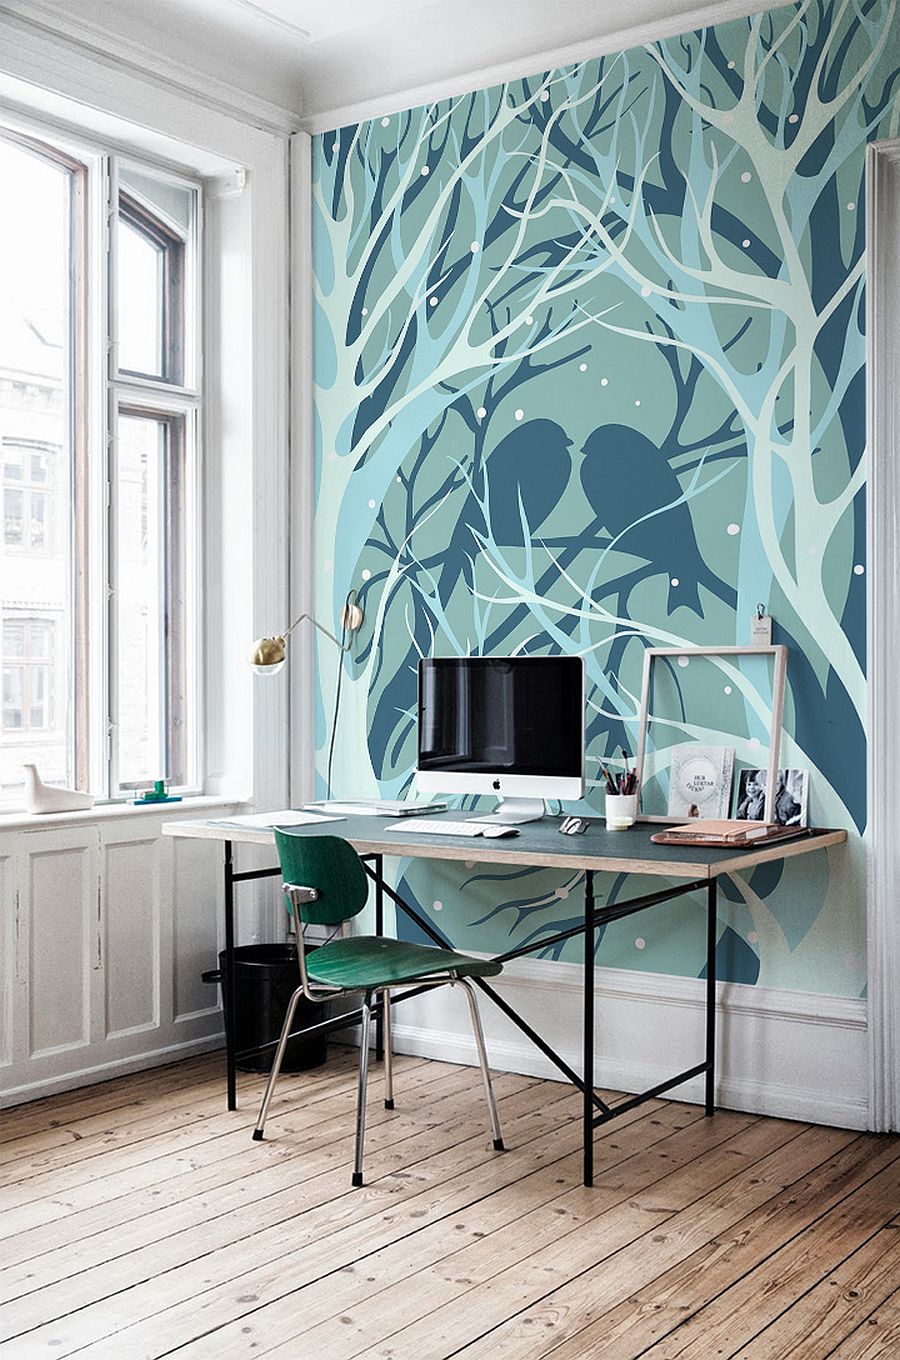 30 Of The Most Incredible Wall Murals Designs You Have Ever Seen (25)